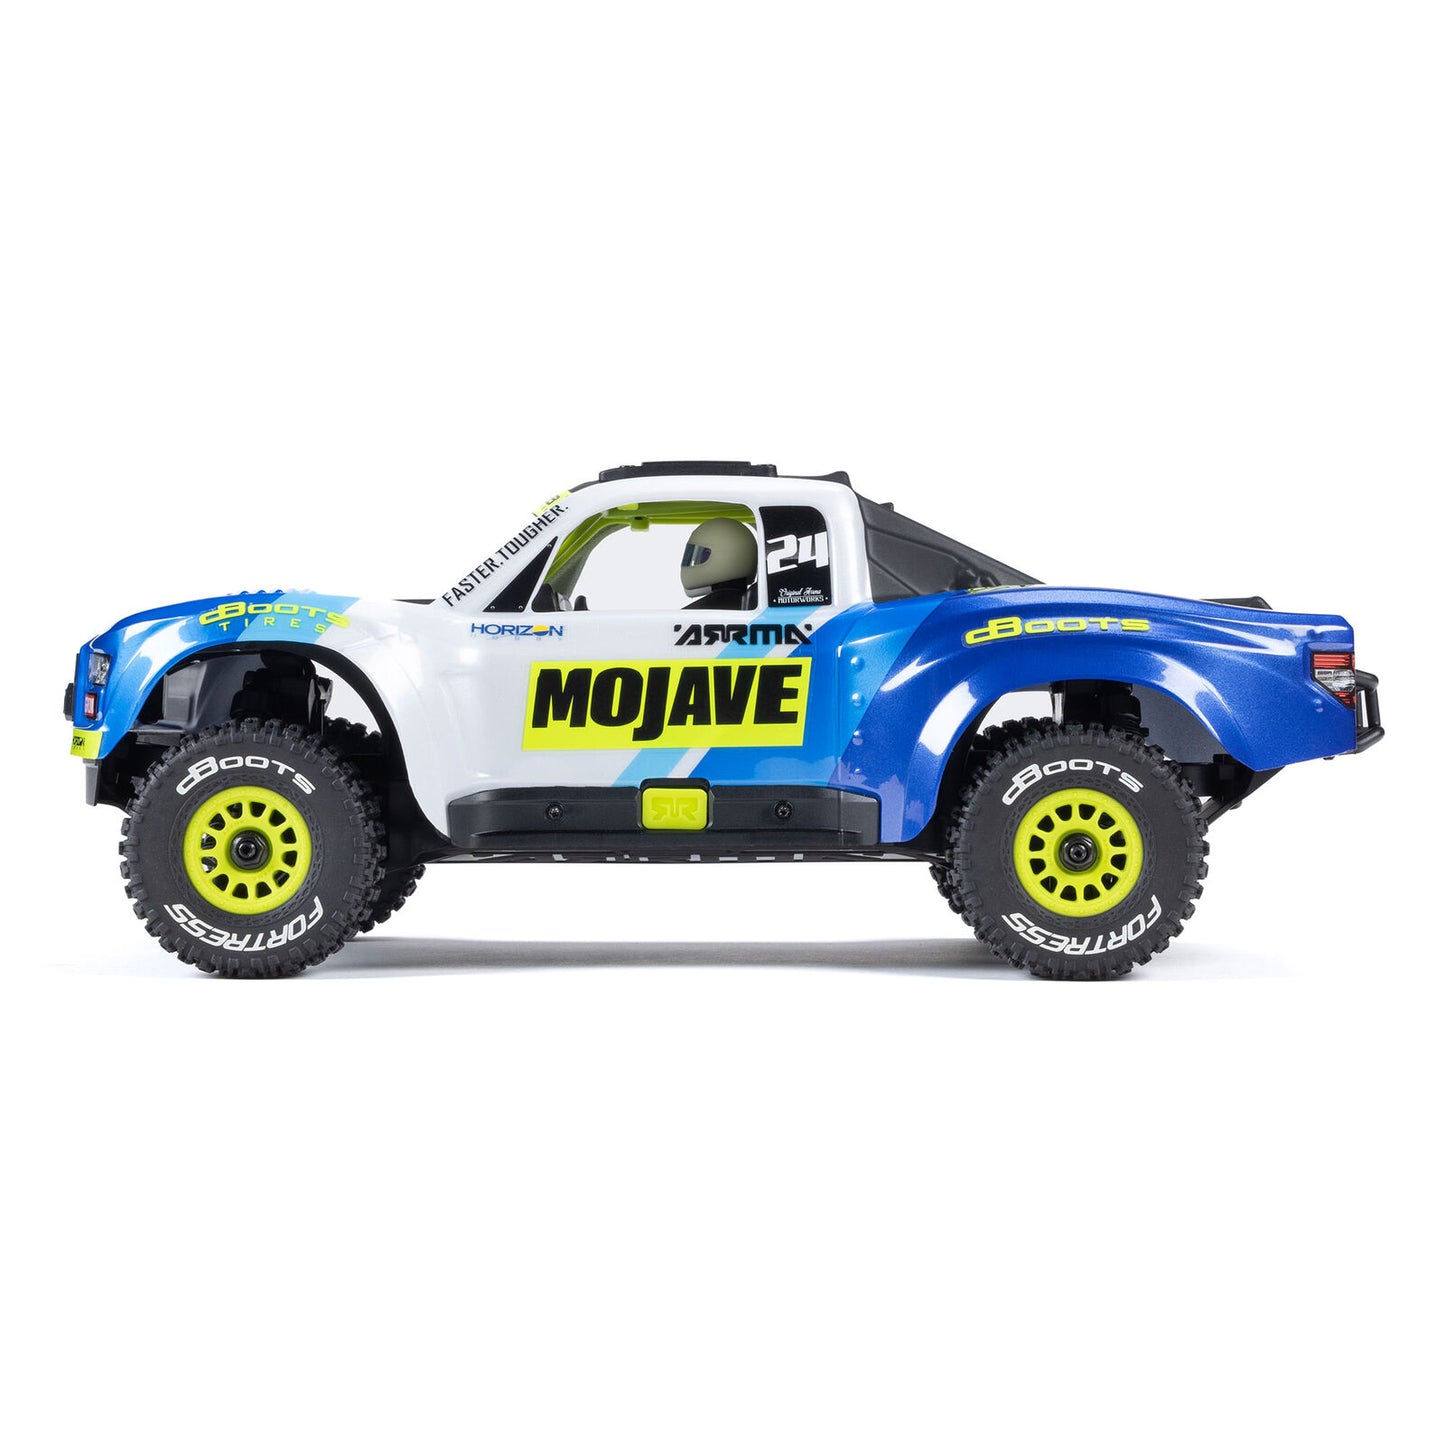 MOJAVE GROM MEGA 380 Brushed 4X4 Small Scale Desert Truck RTR with Battery & Charger, Blue/White